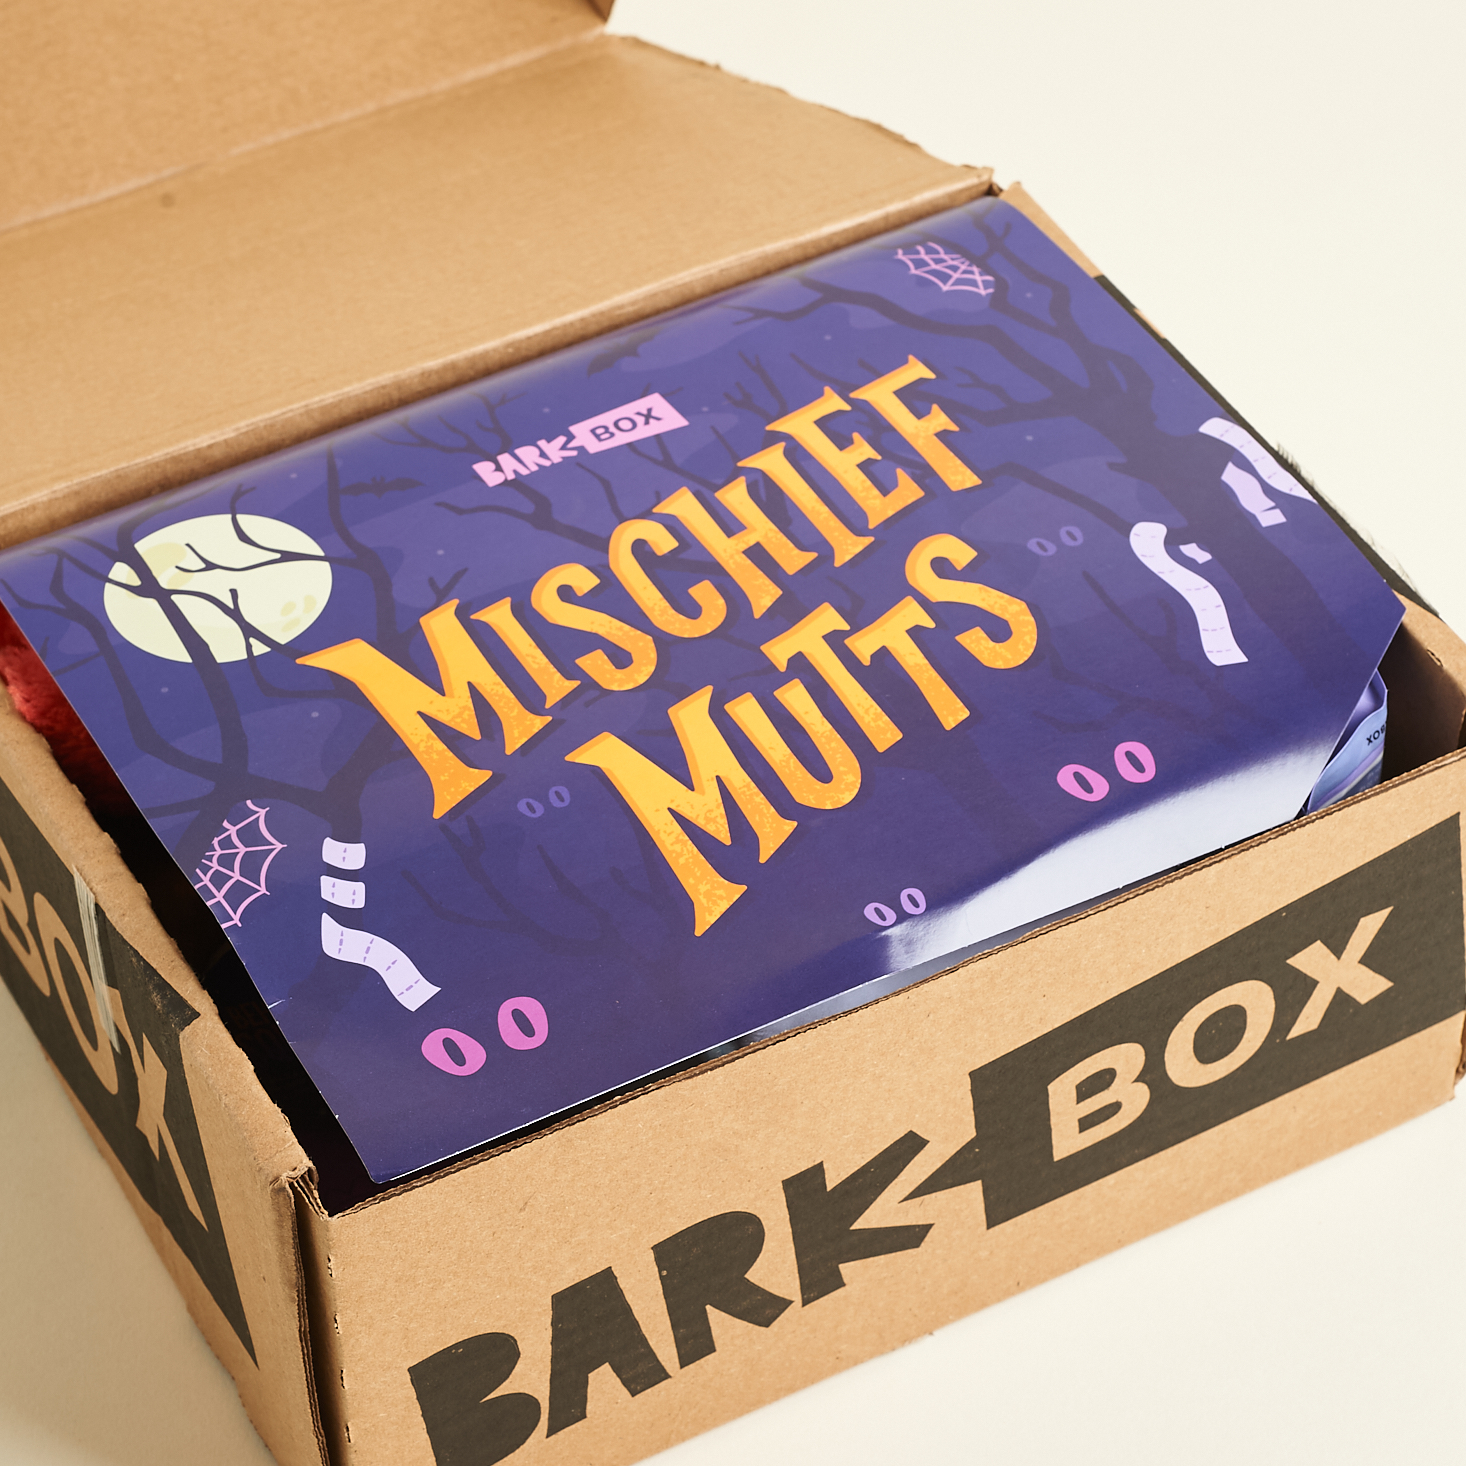 BarkBox “Mischief Mutts” October Subscription Box Review + Coupon MSA